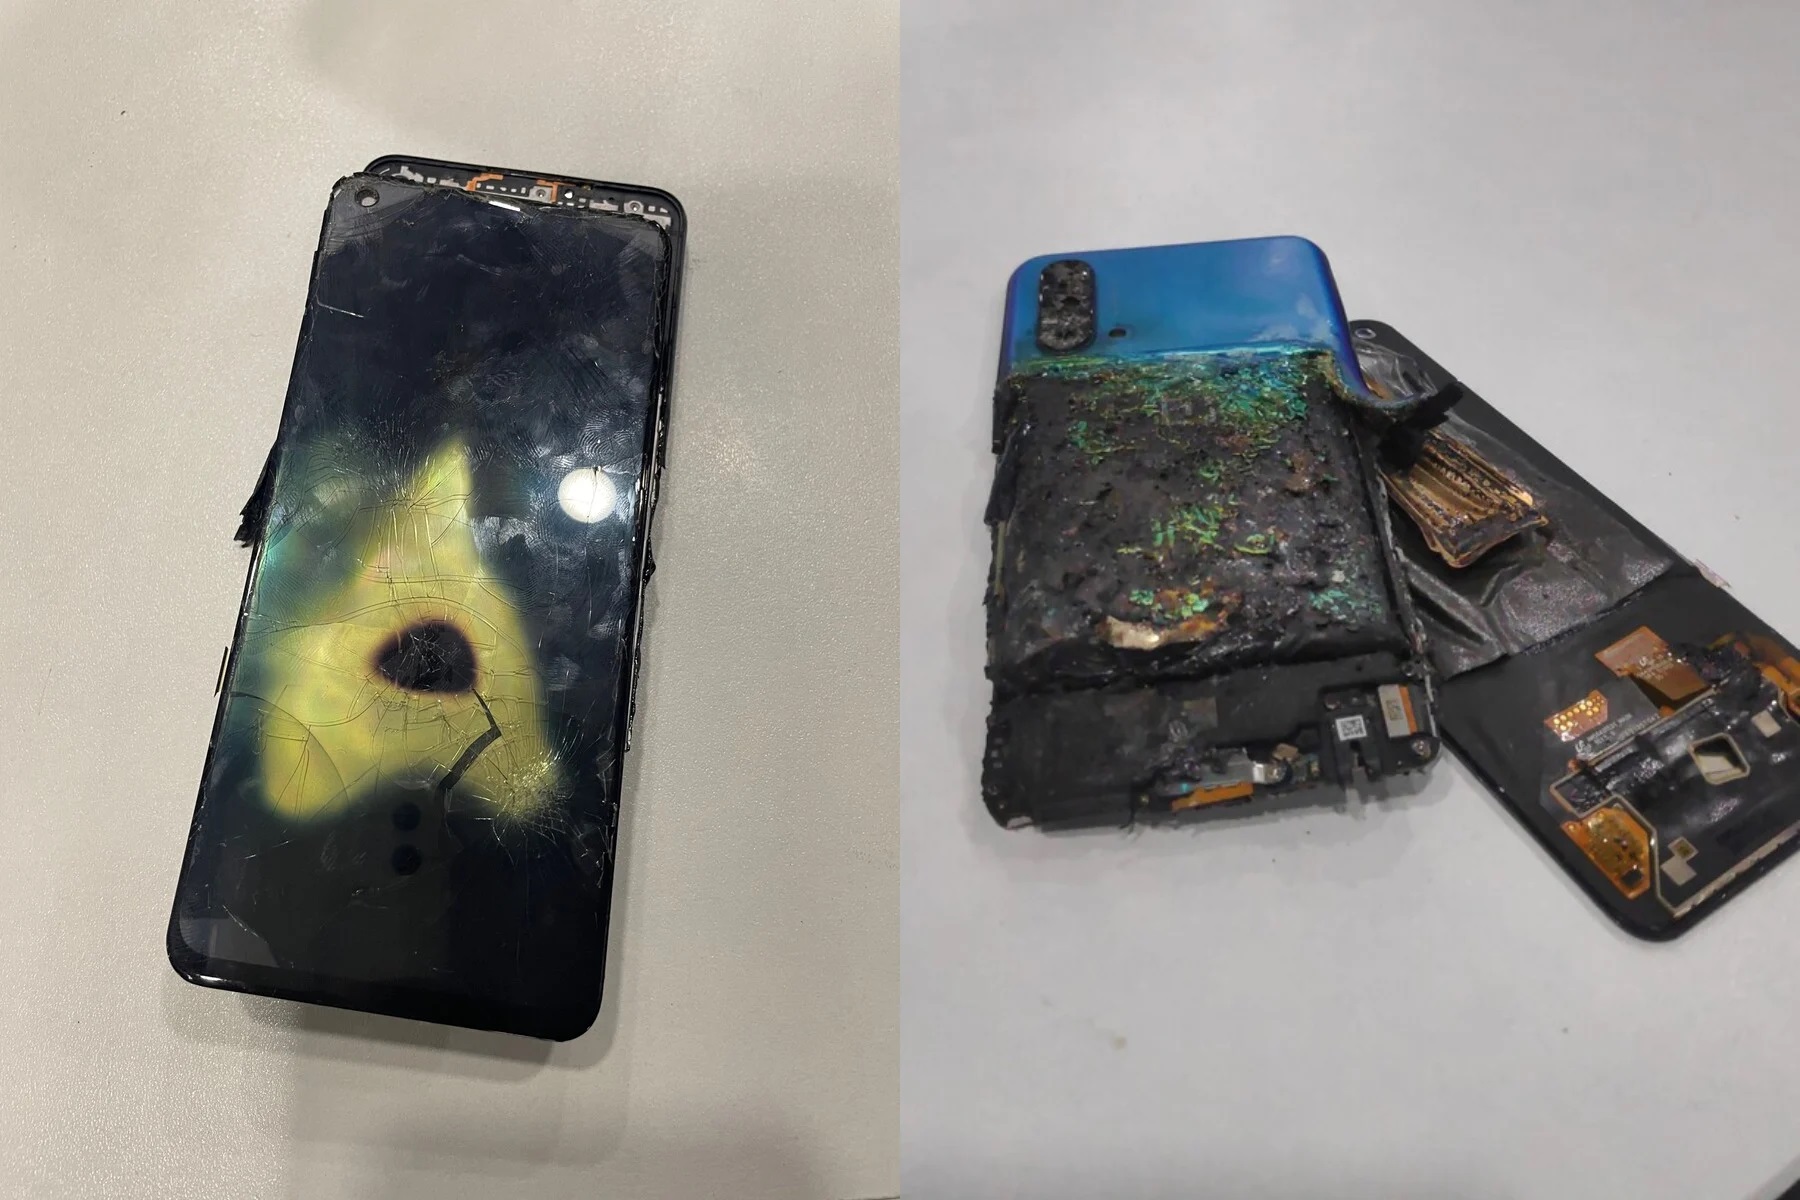 Another OnePlus smartphone exploded in India: the company promised to give a new gadget